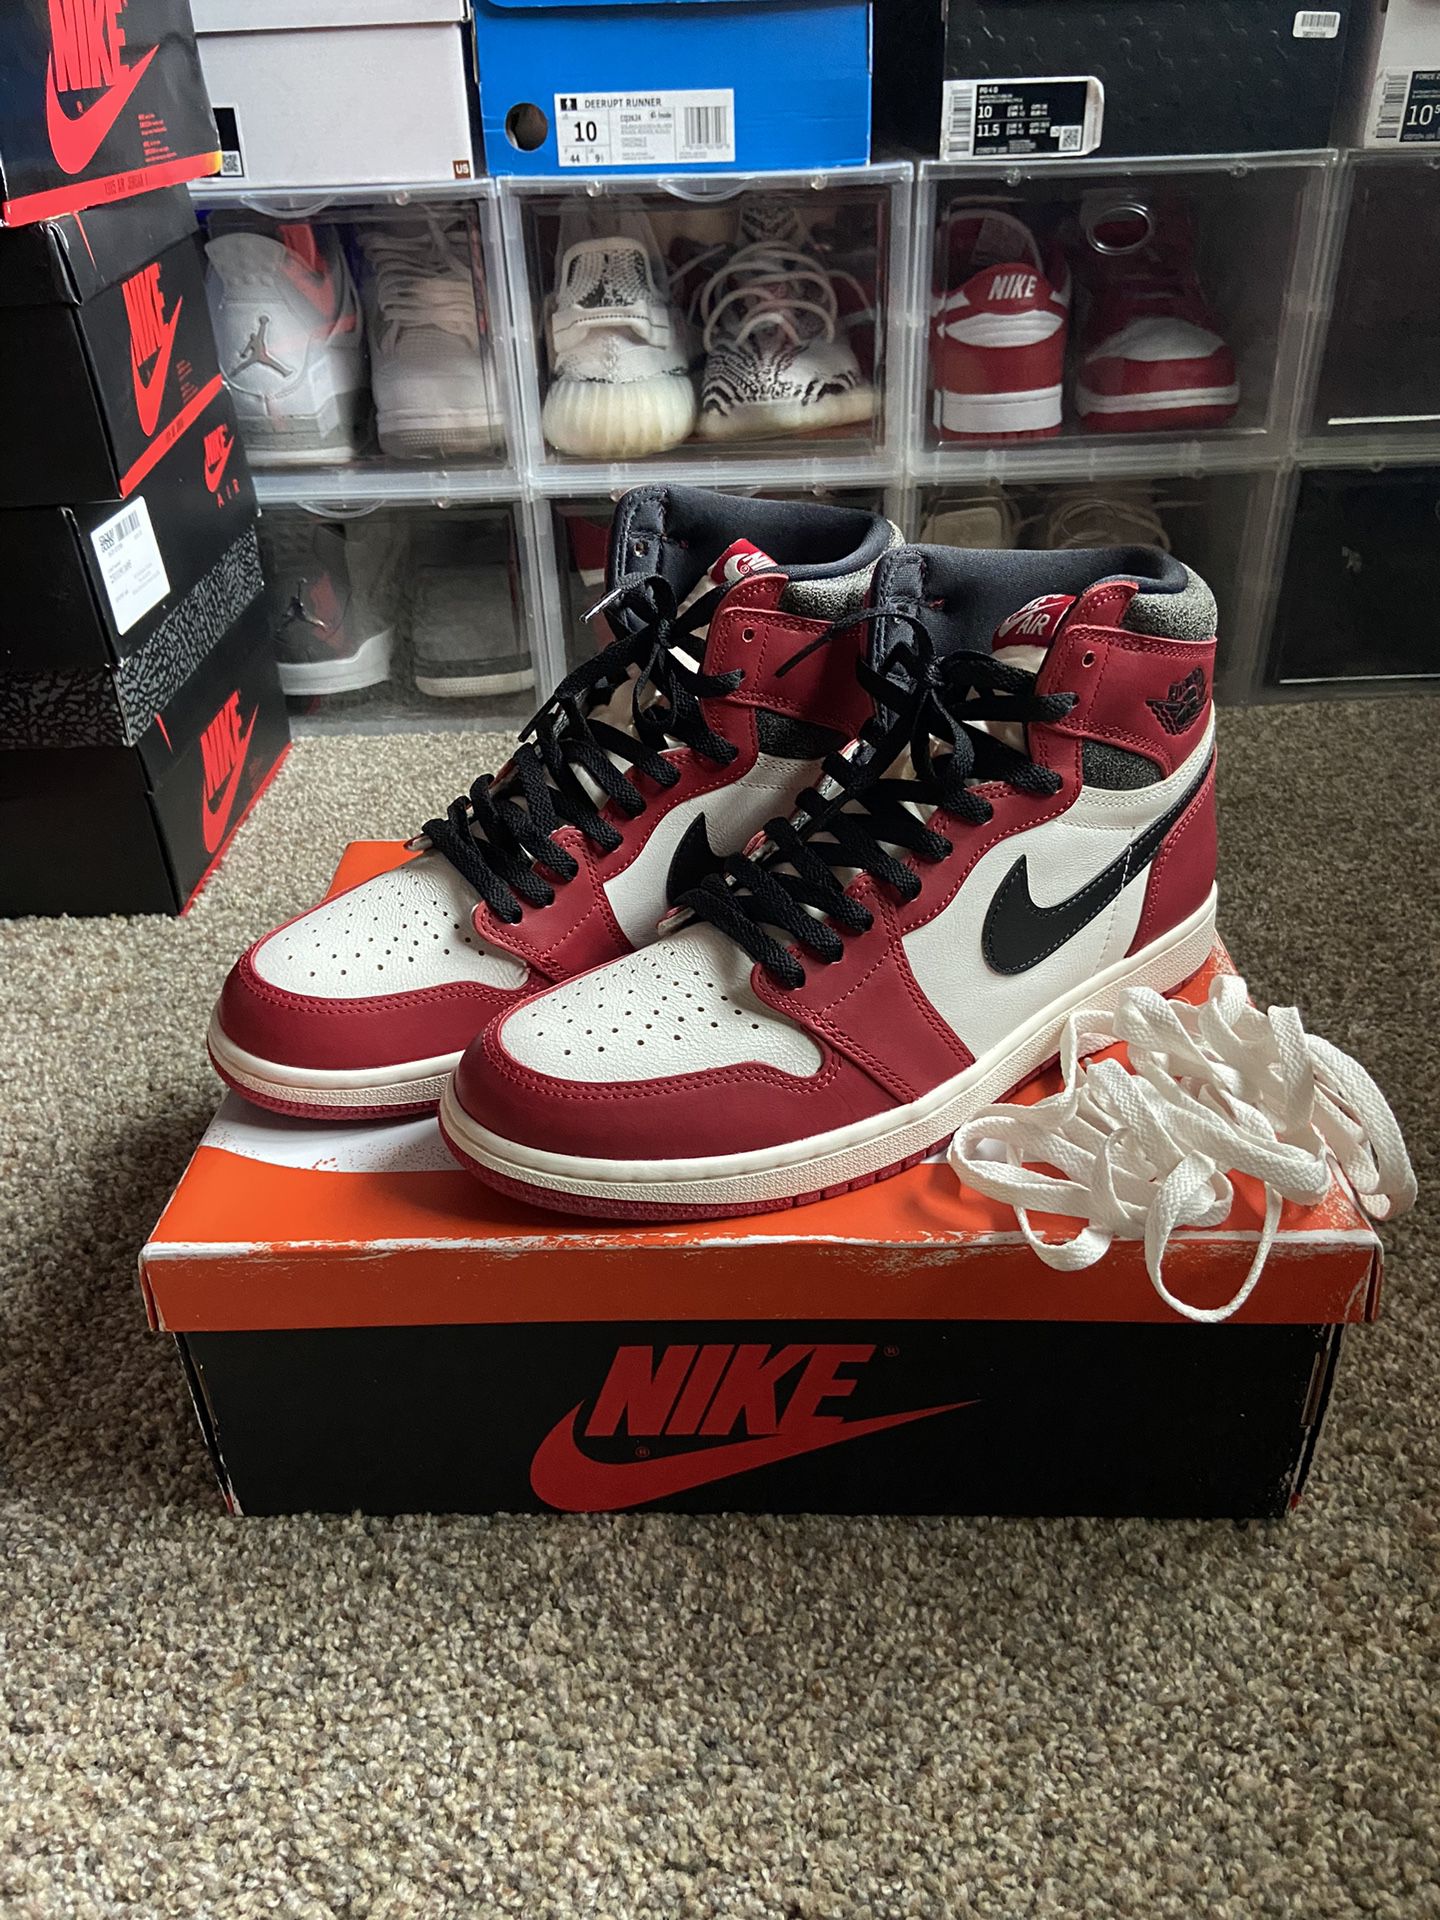 Jordan 1 lost and found size 11